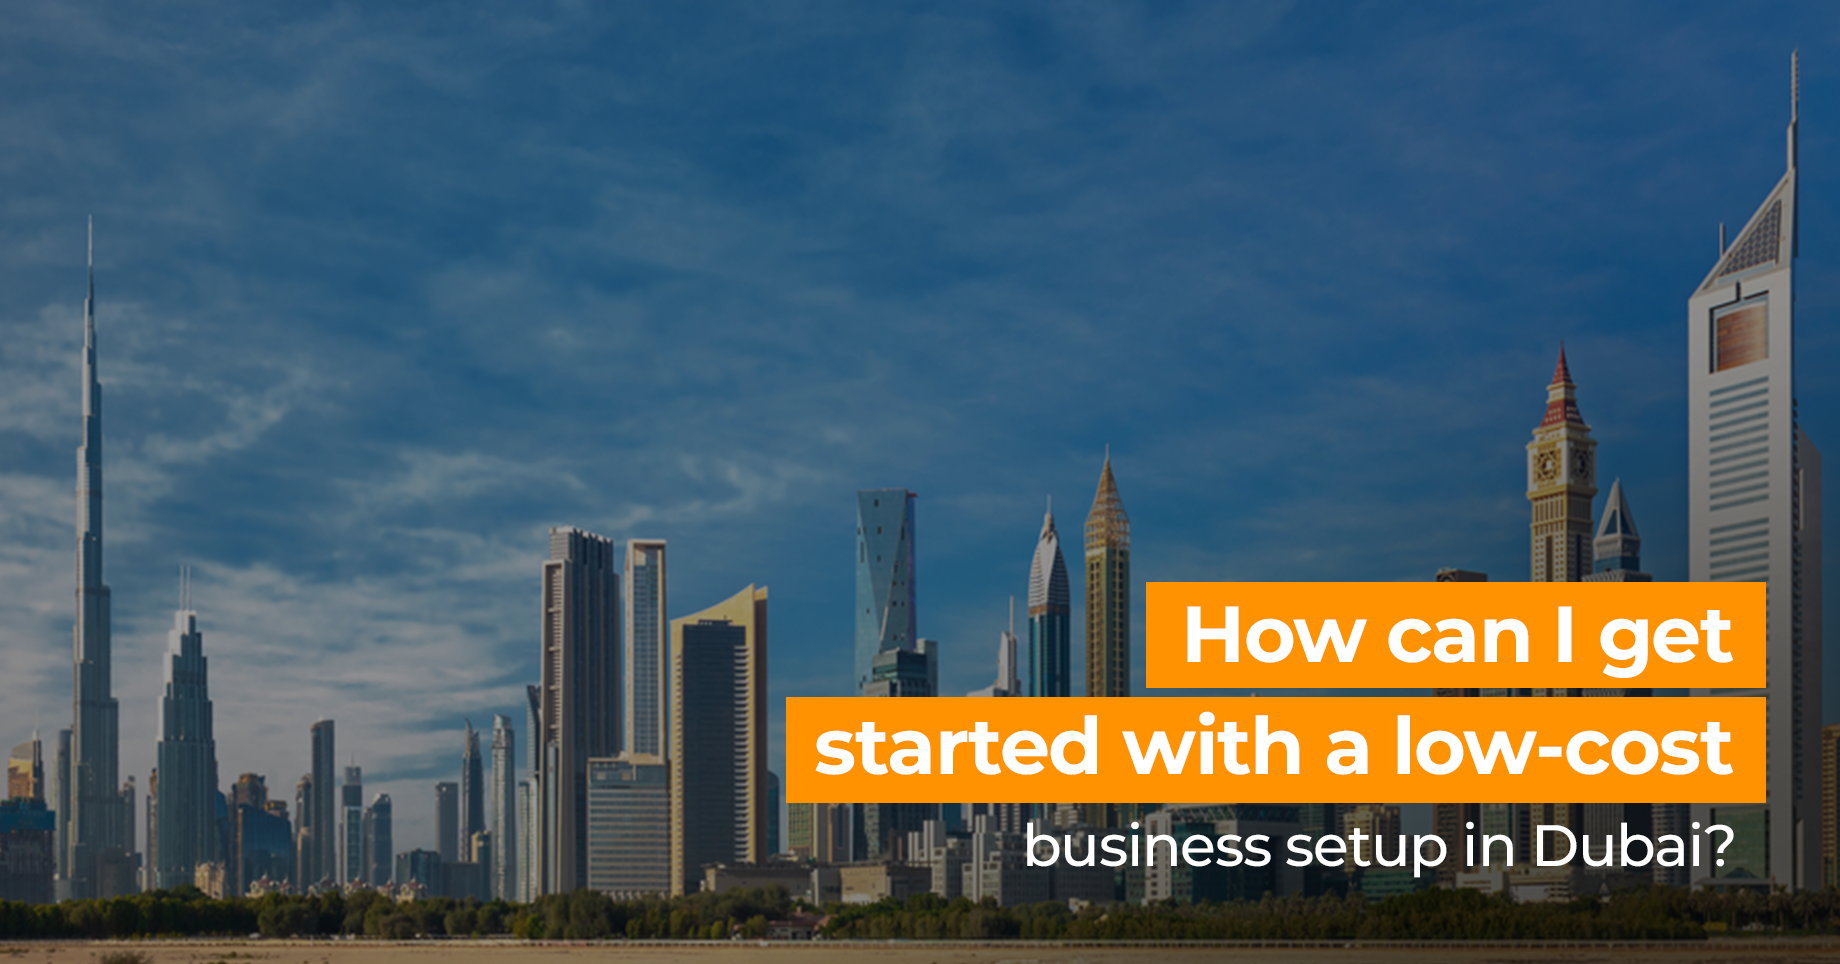 How Can I Get Started with a Low-Cost Business Setup in Dubai